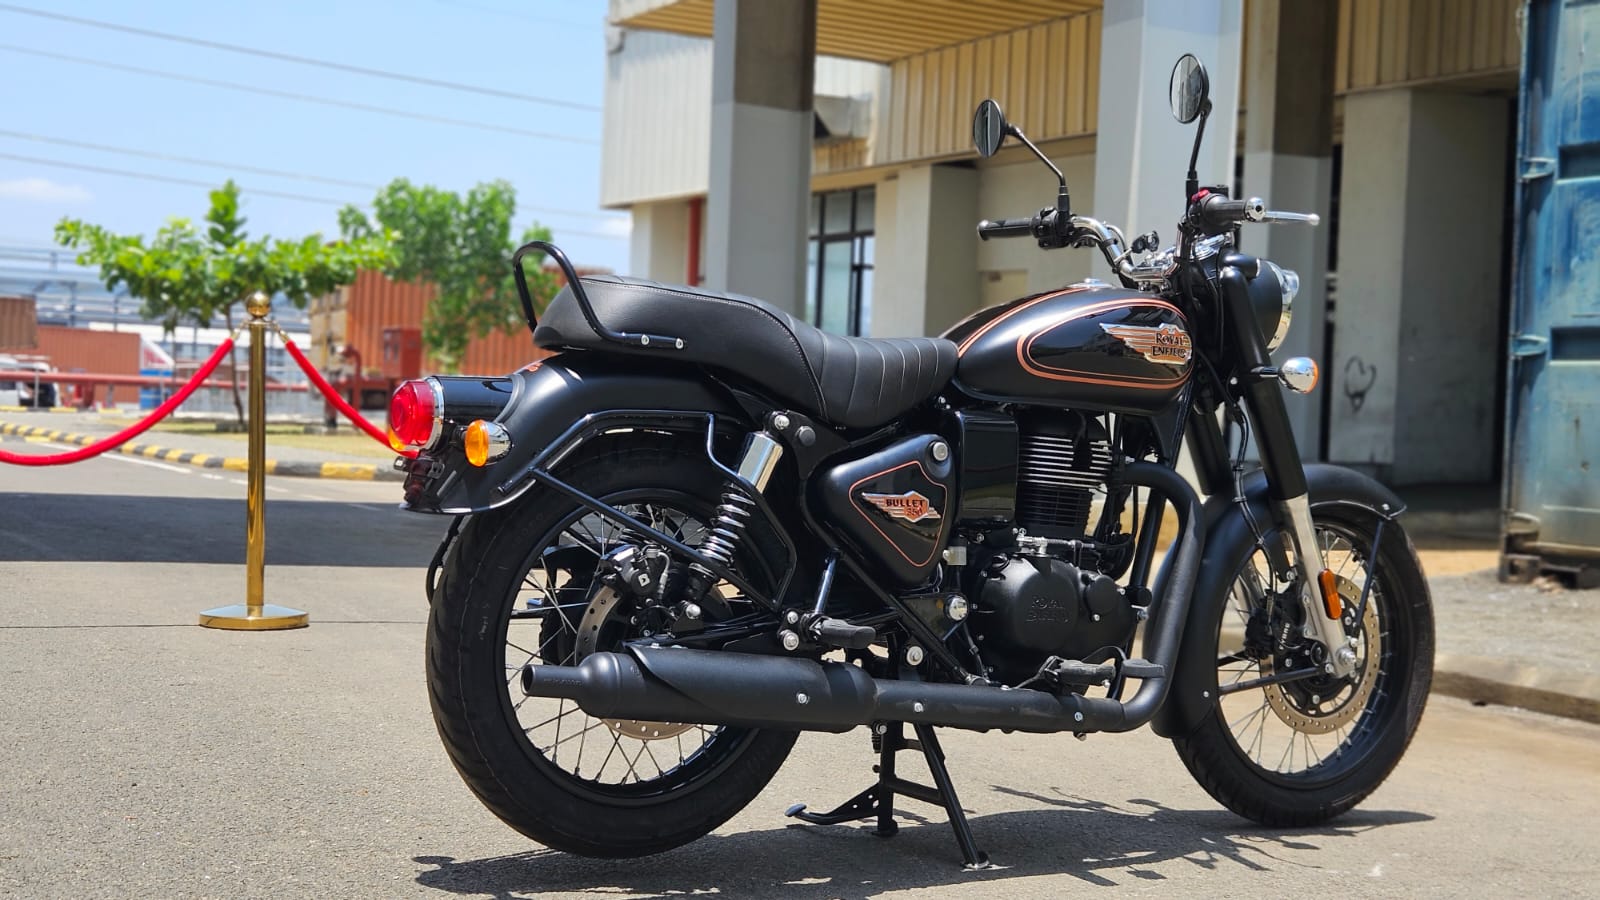 Newgen Royal Enfield Bullet 350 launch in Europe by end of October